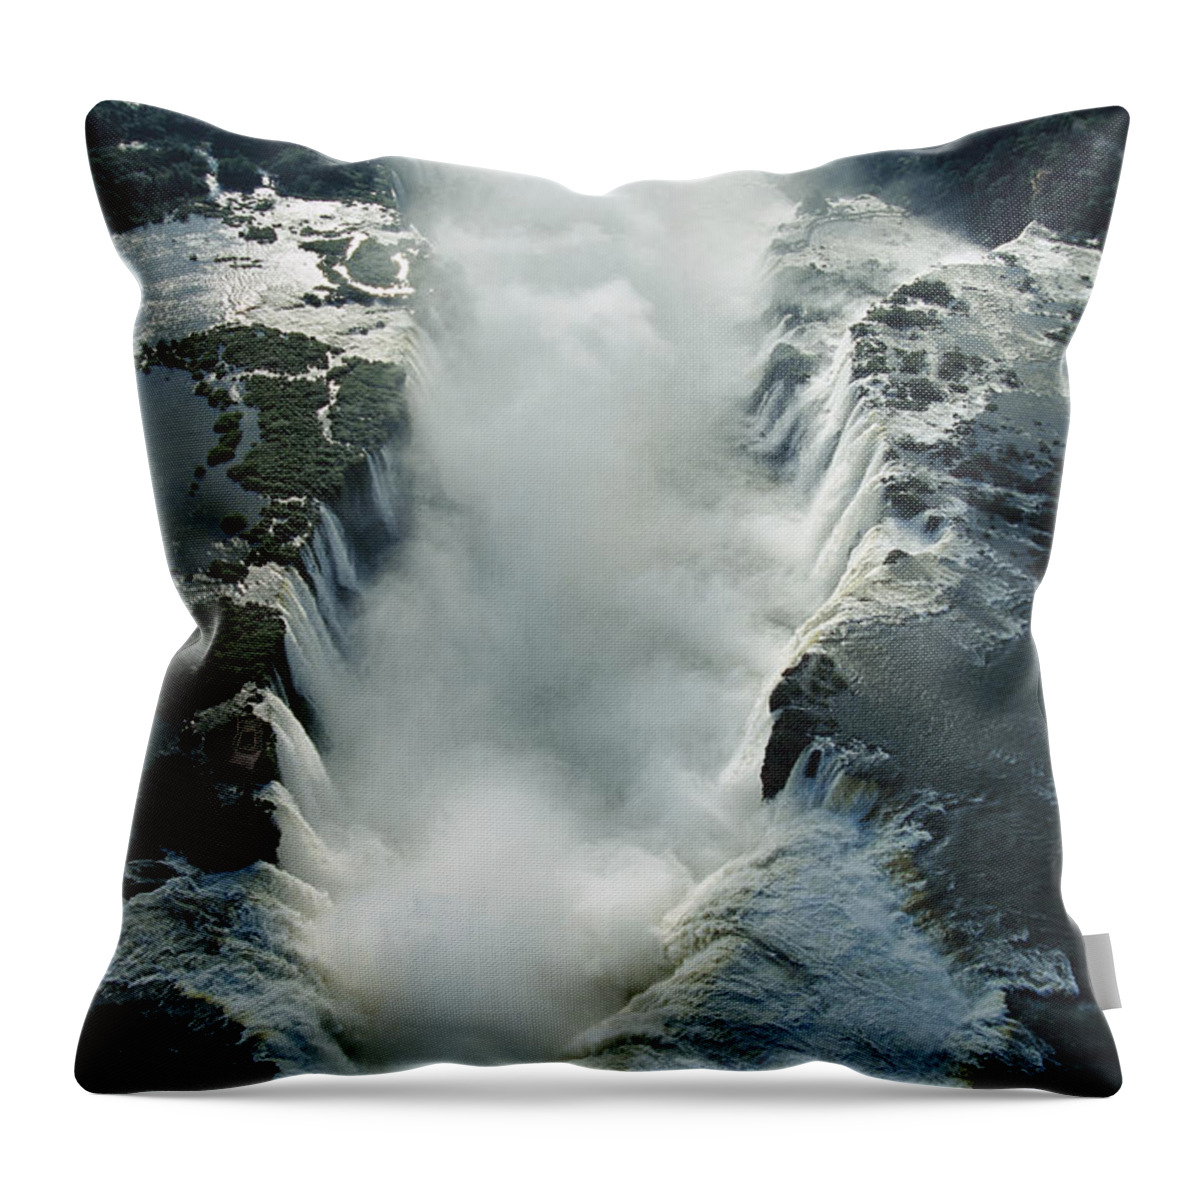 00750593 Throw Pillow featuring the photograph View Over The Iguacu Falls by Mark Moffett